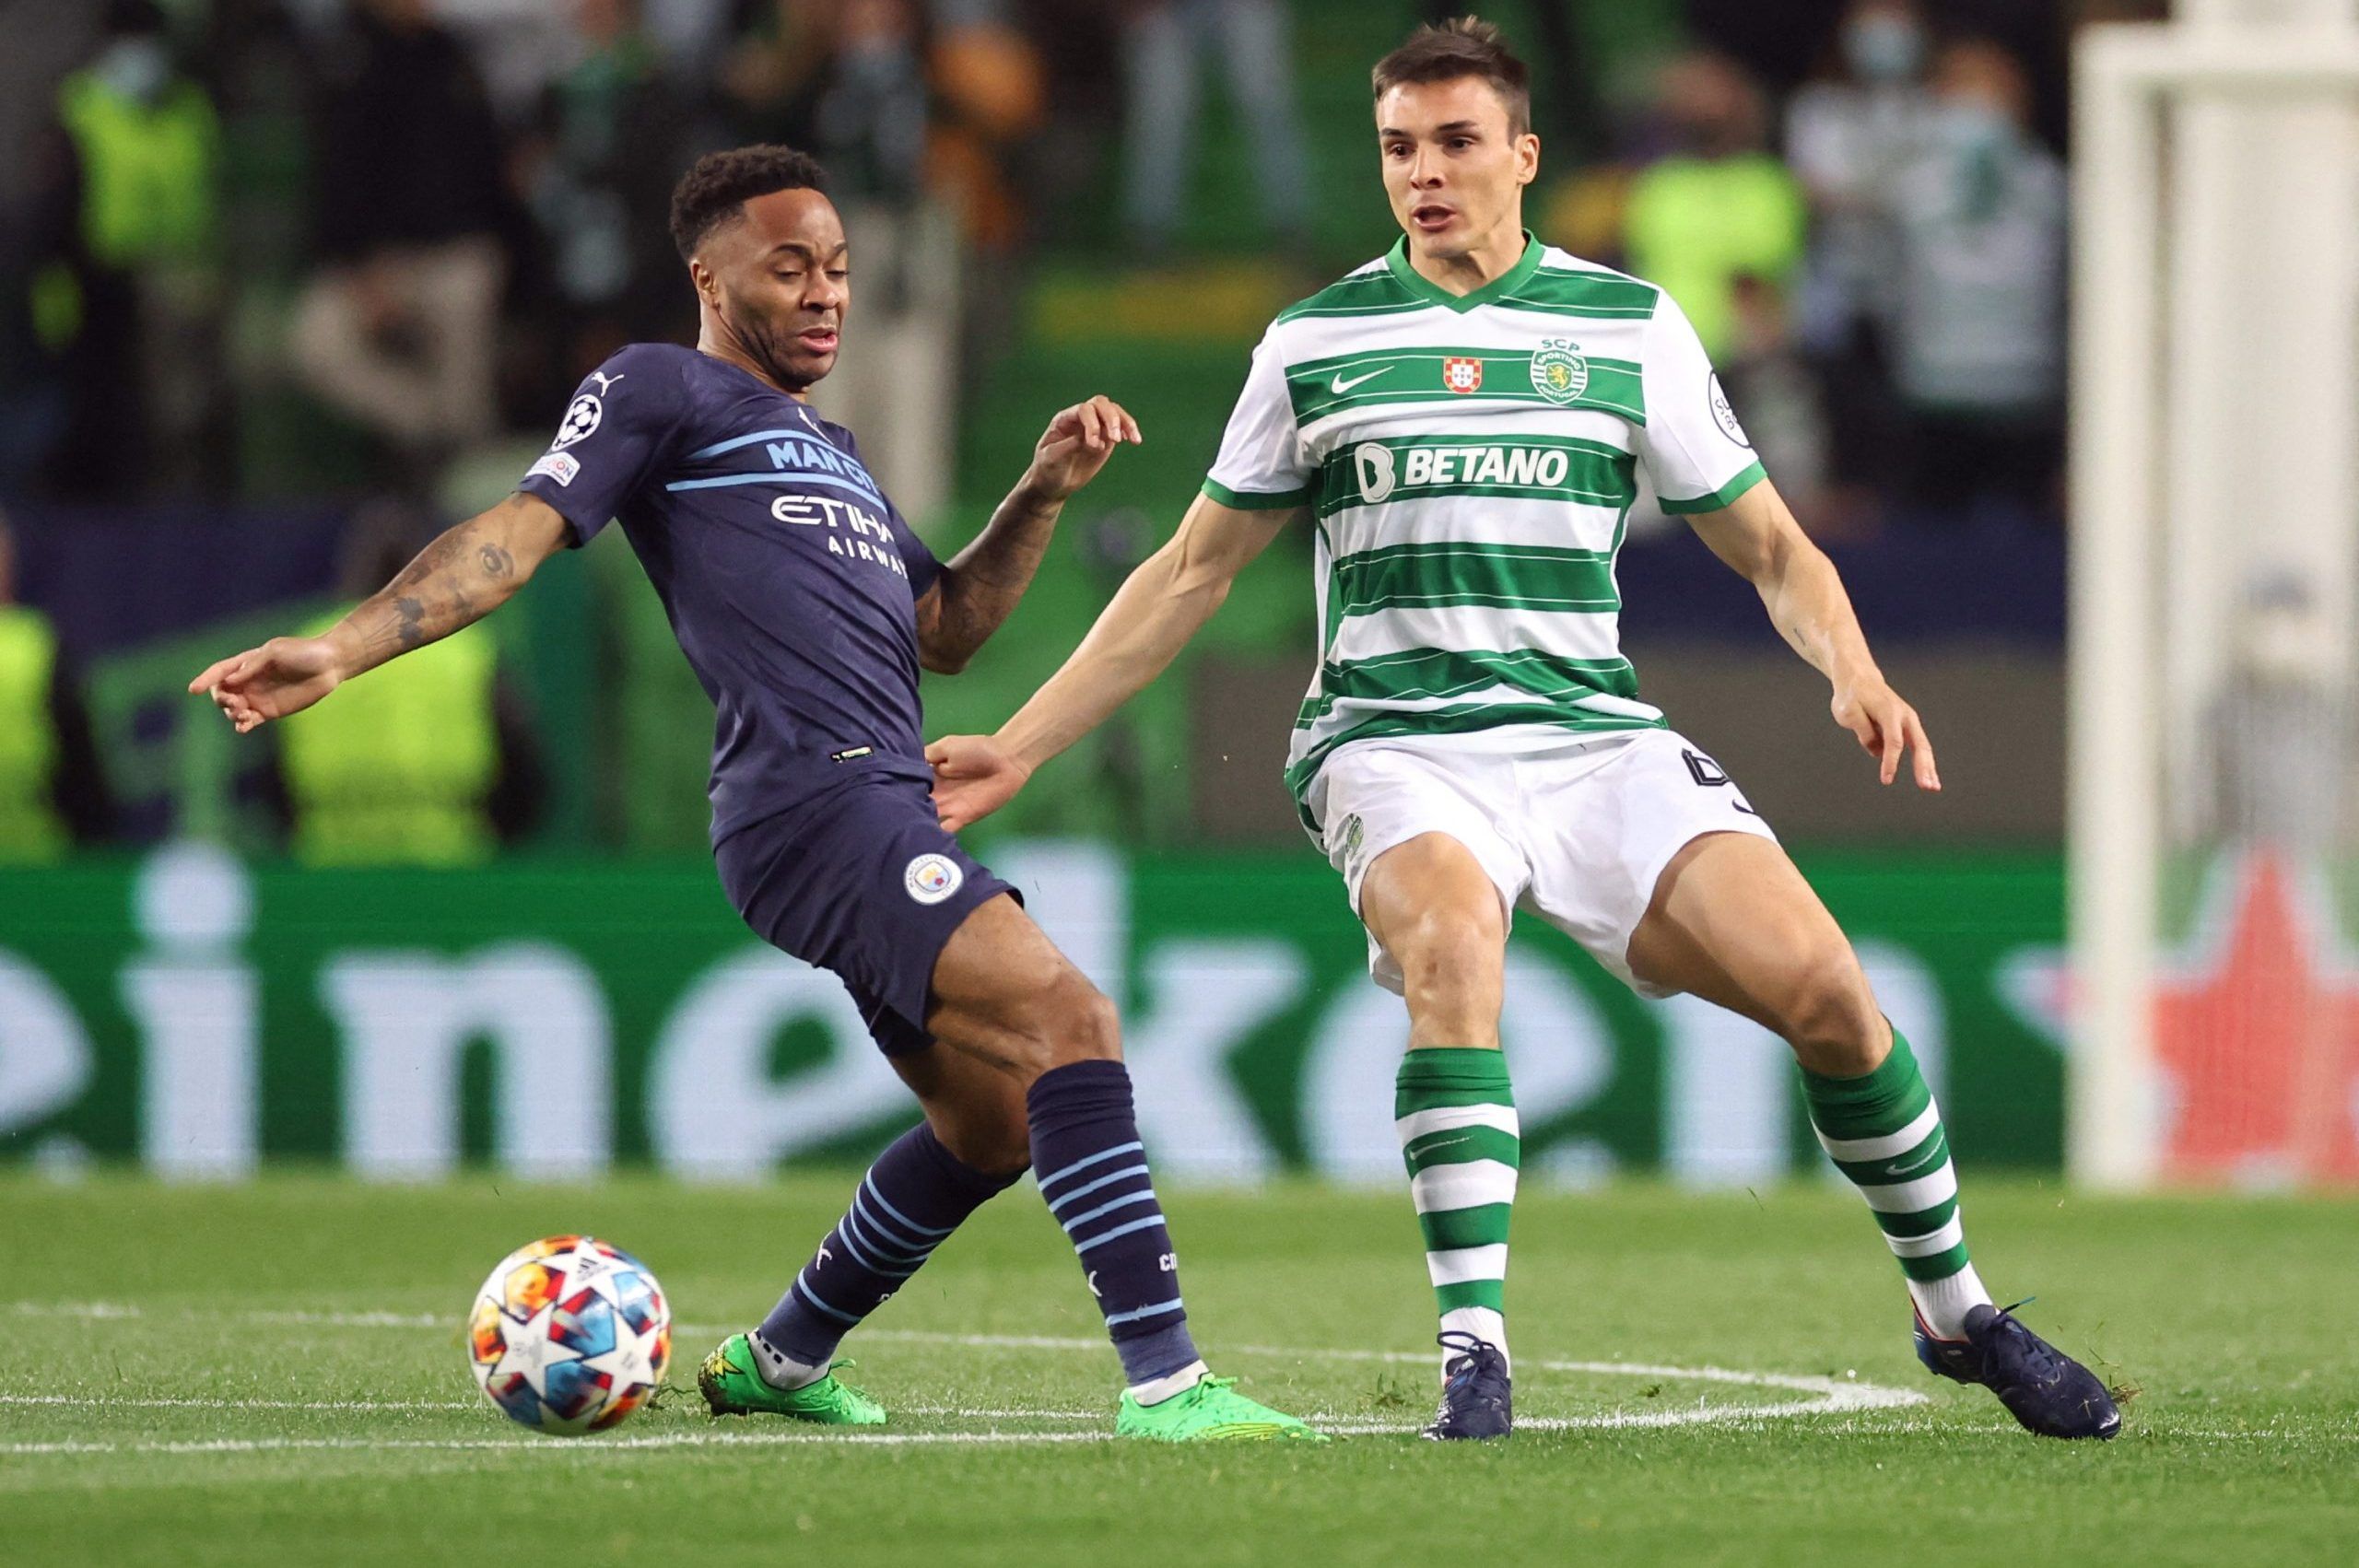 Soccer Football - Champions League - Round of 16 First Leg - Sporting CP v Manchester City - Estadio Jose Alvalade, Lisbon, Portugal - February 15, 2022 Manchester City's Raheem Sterling in action with Sporting CP's Joao Palhinha Action Images via Reuters/Carl Recine